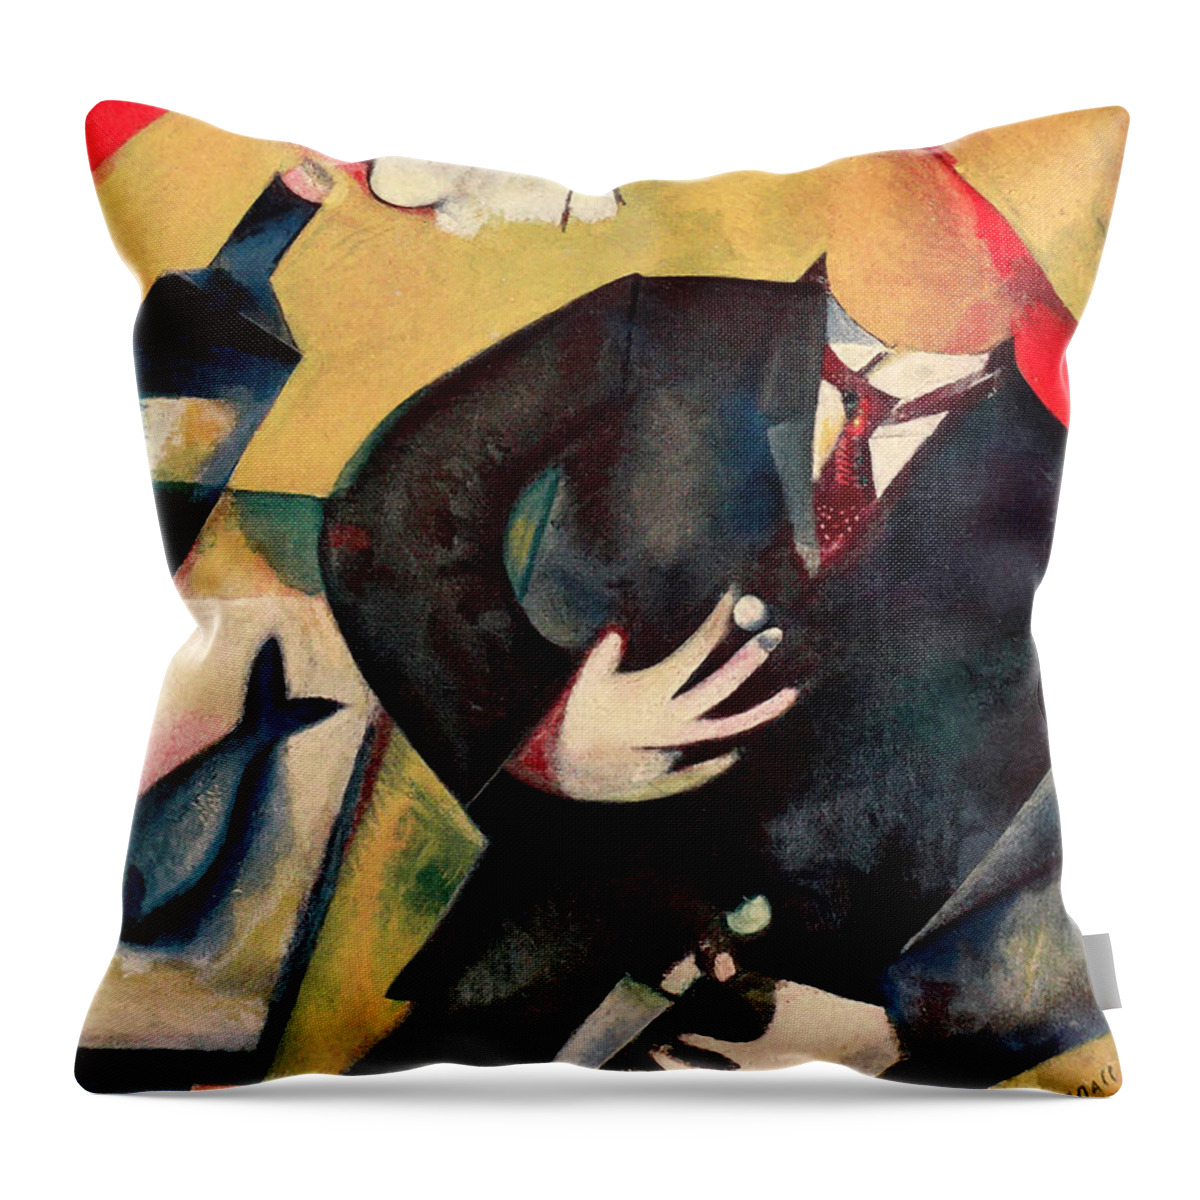 Wingsdomain Throw Pillow featuring the painting Remastered Art The Drunkard by Marc Chagall 20220115 v2 by Marc Chagall